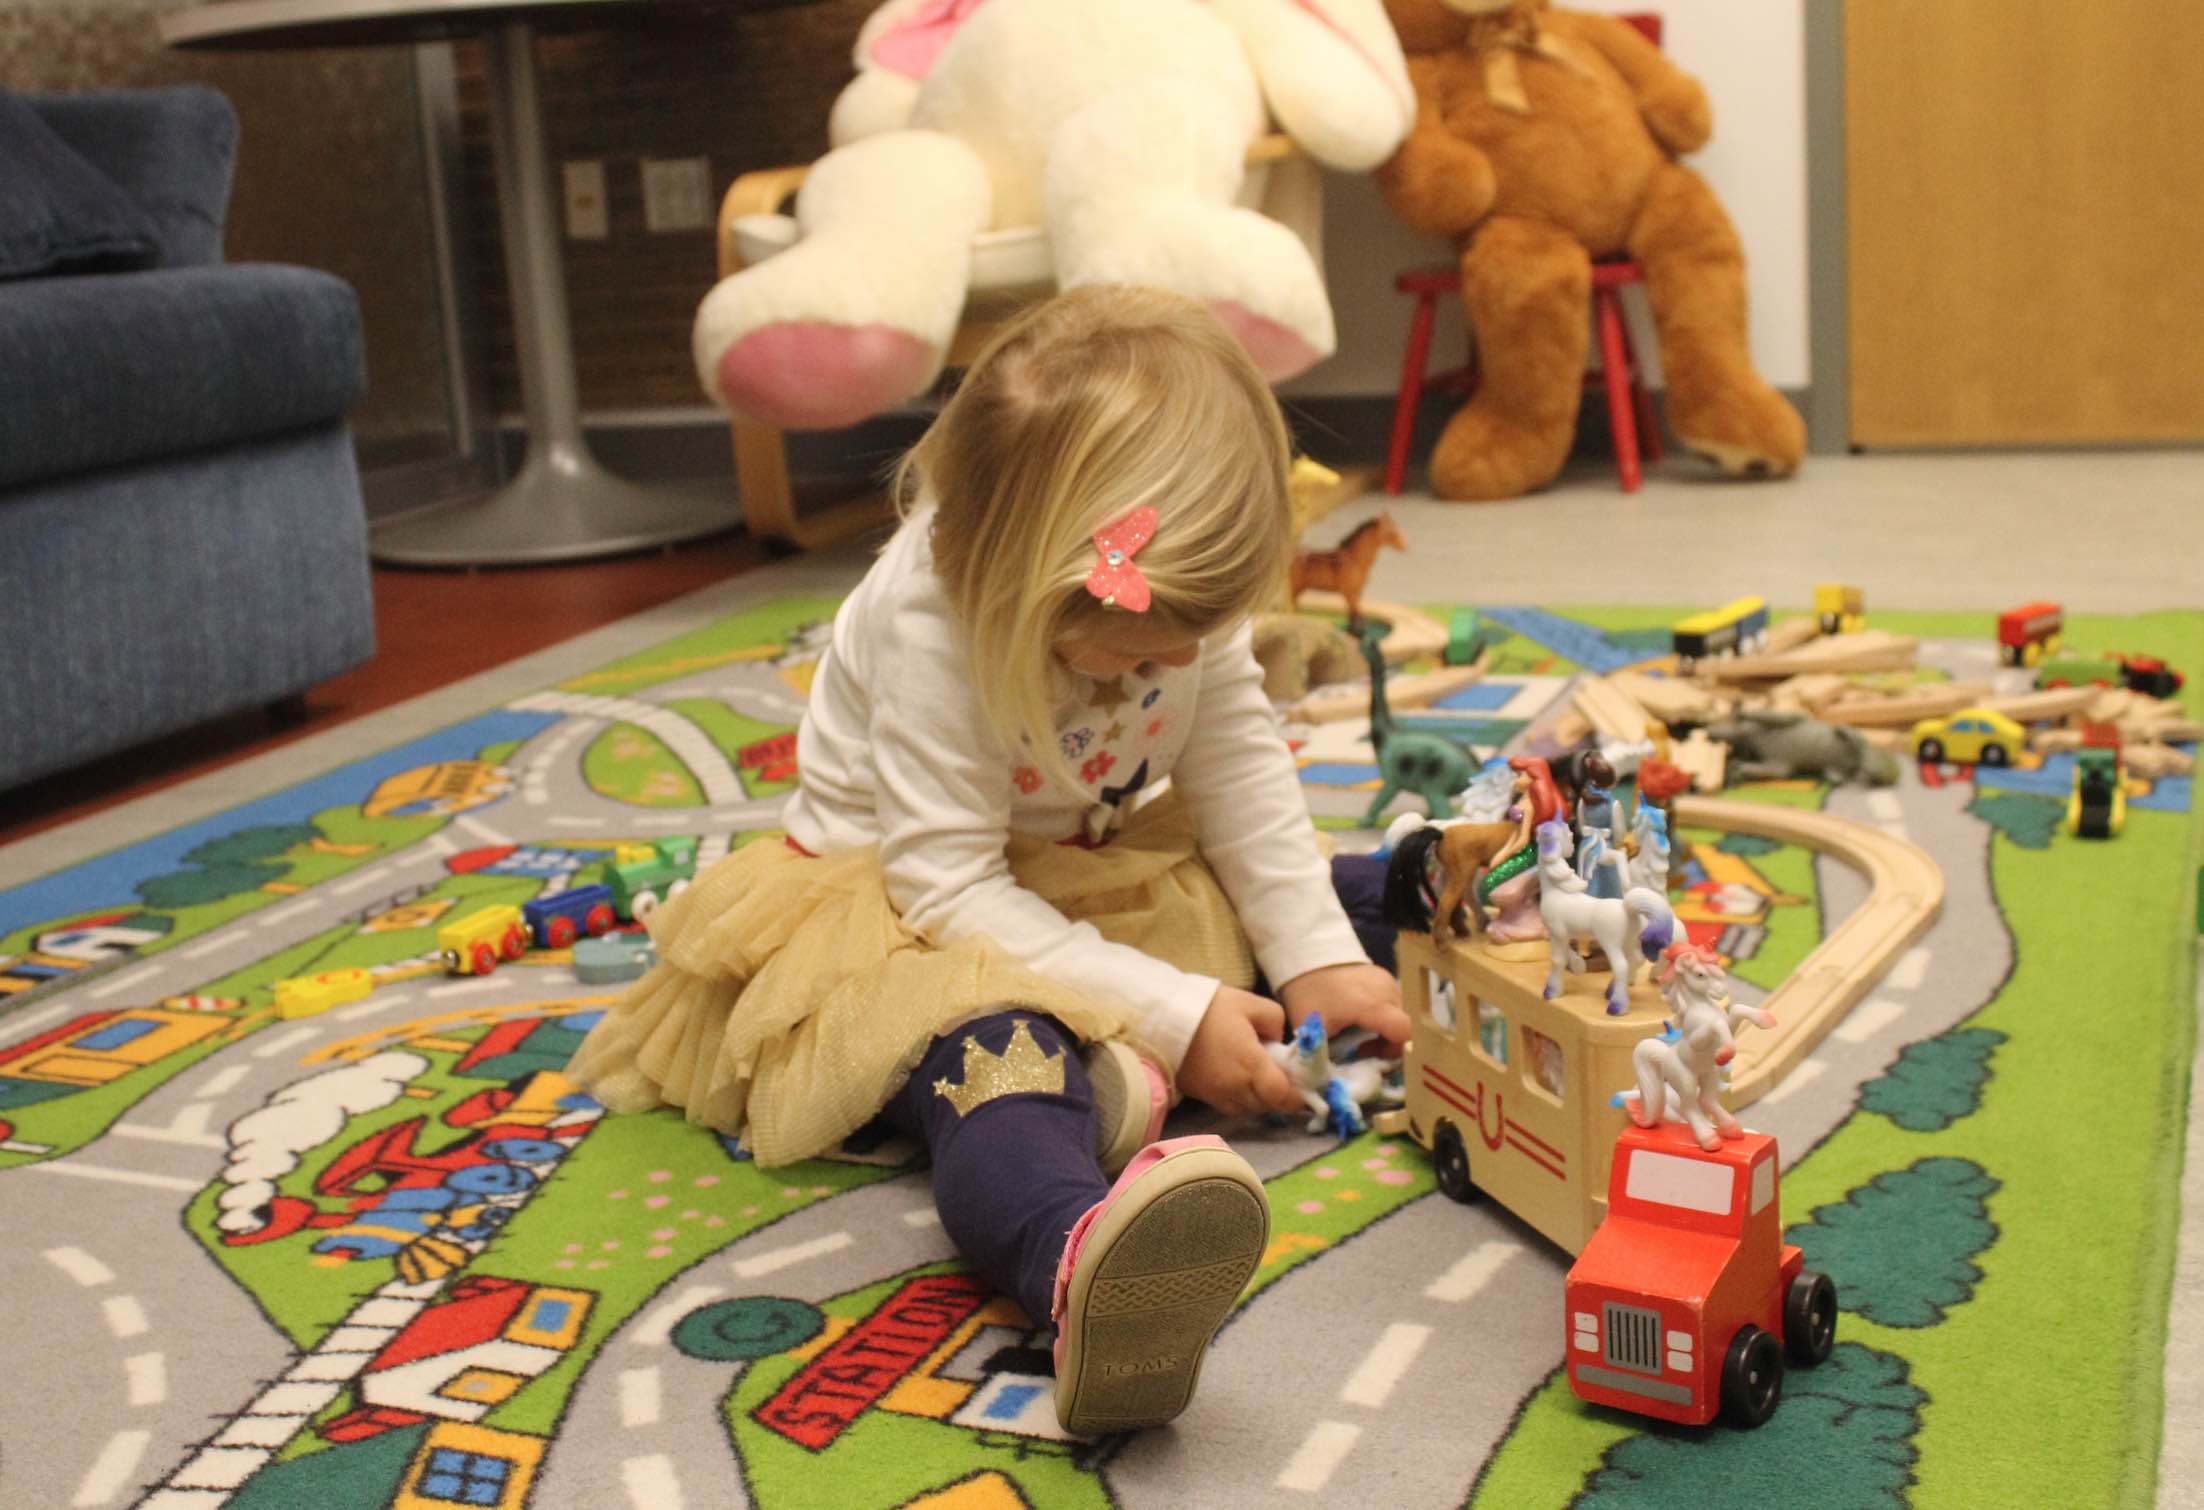 Girl playing with toys in colorful playroom